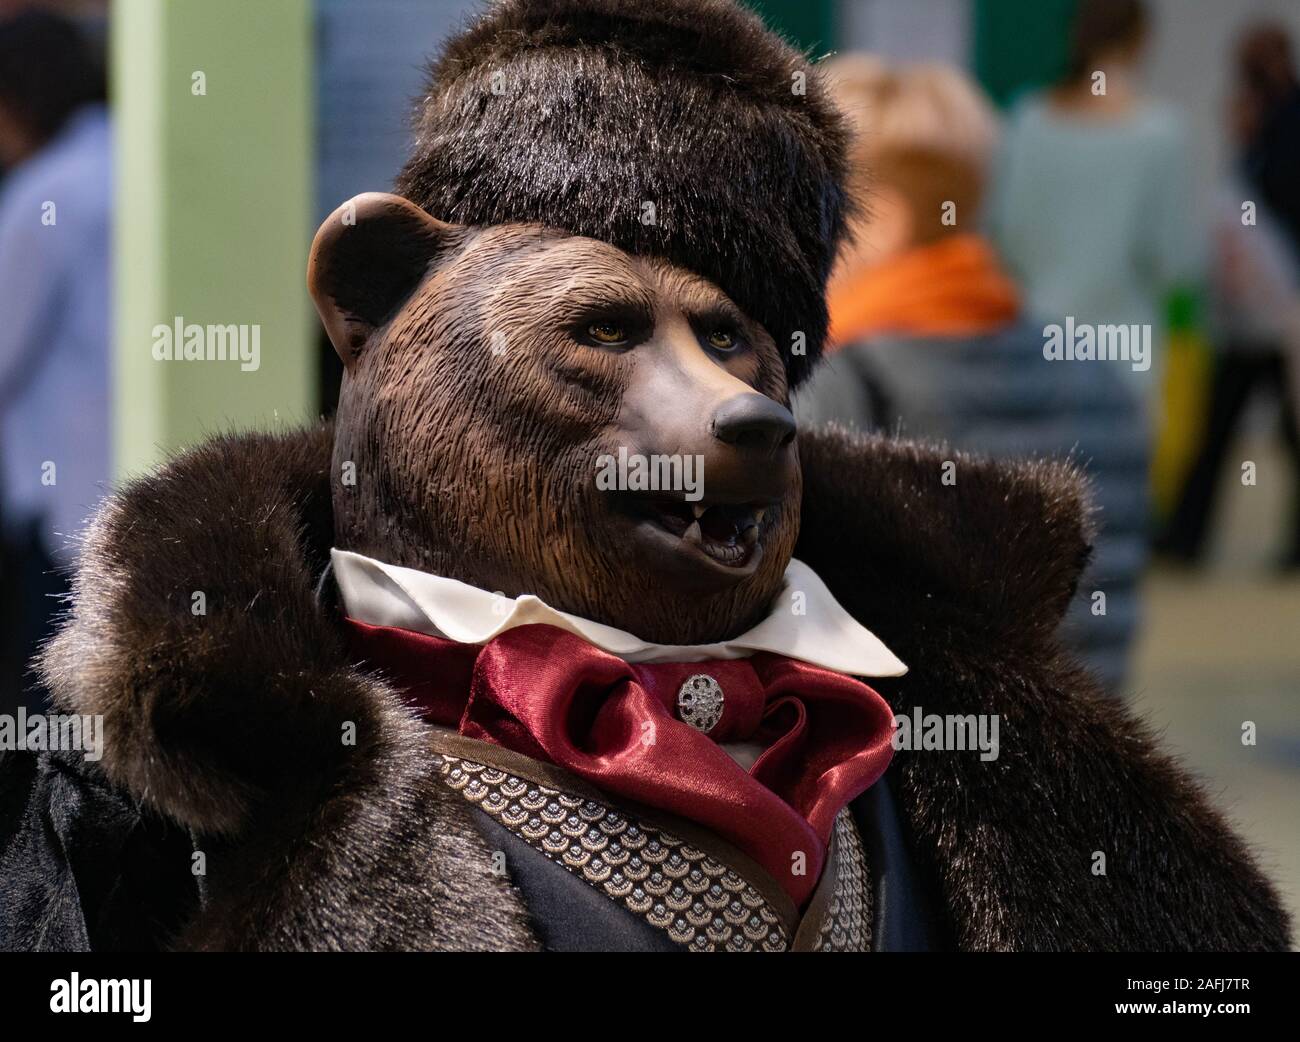 Bear in a fur coat and hat Stock Photo - Alamy